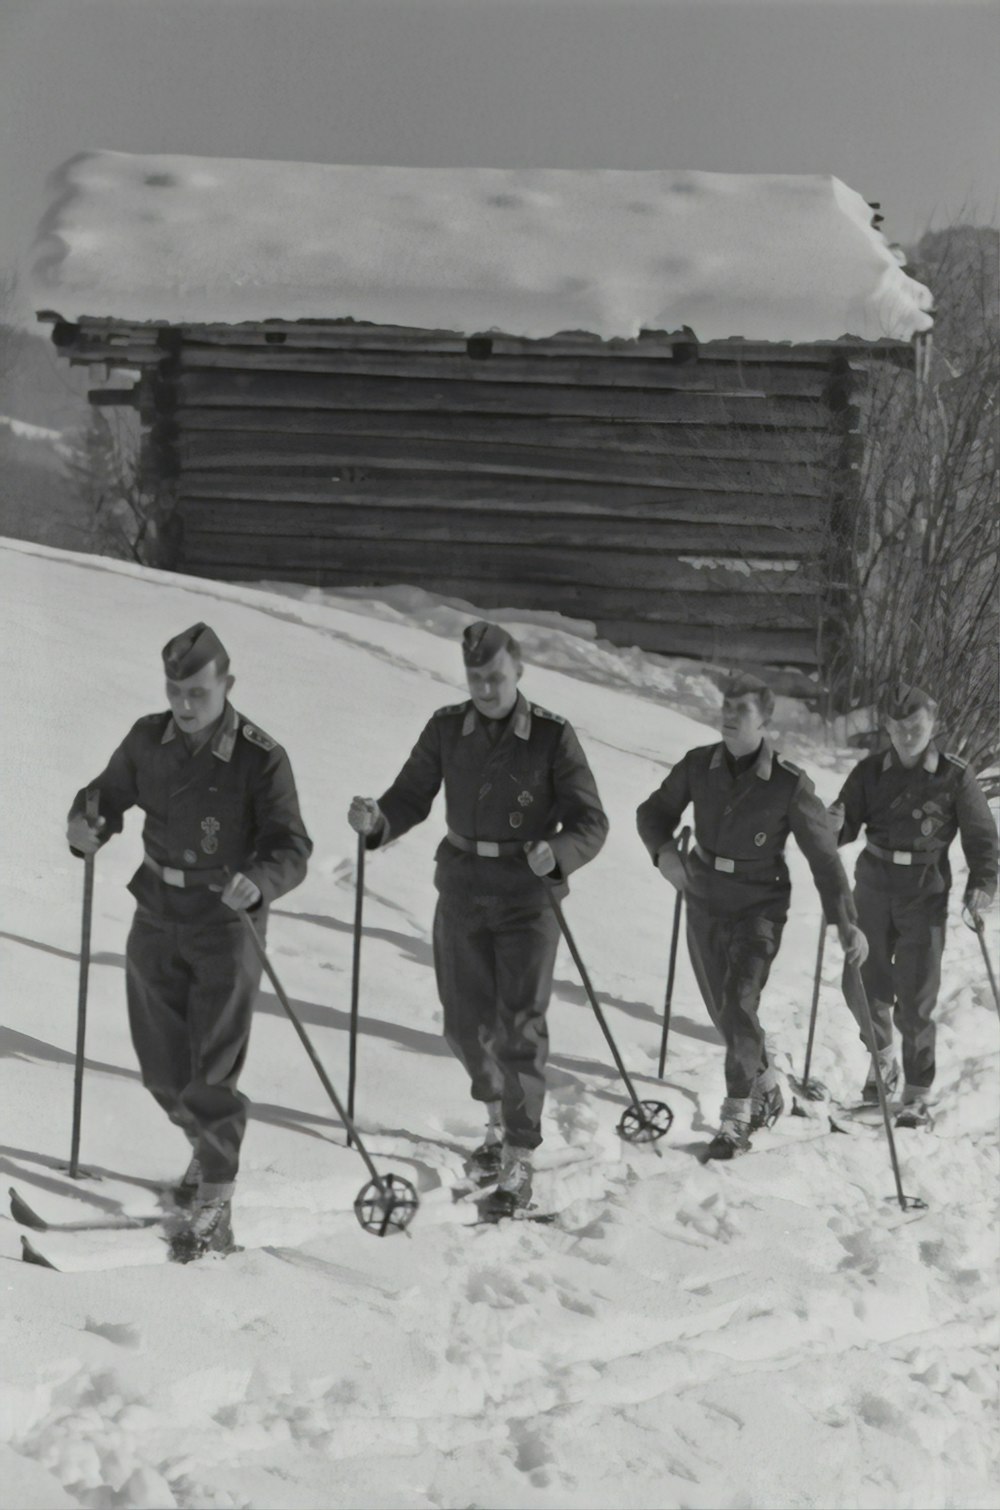 grayscale photography of four men walking on snow